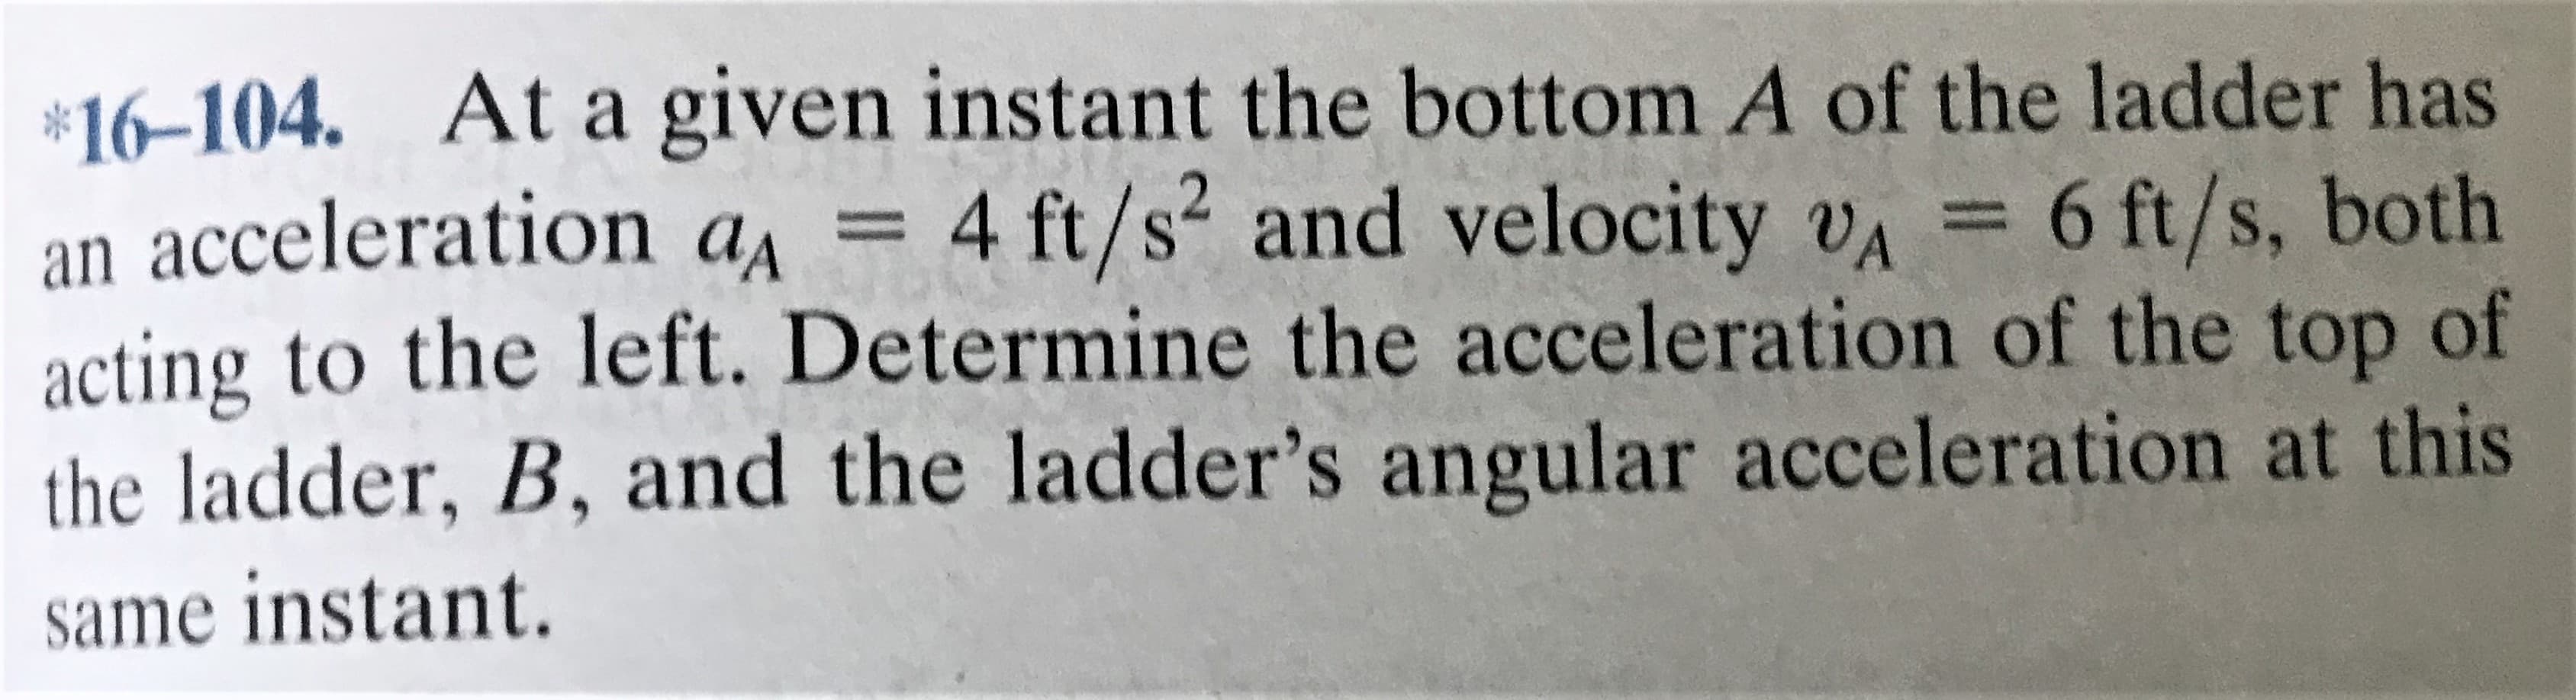 *16-104. At a given instant the bottom A of the ladder has
an acceleration a =
acting to the left. Determine the acceleration of the top of
4 ft/s and velocity vA
6 ft/s, both
the ladder, B, and the ladder's angular acceleration at this
same instant.
